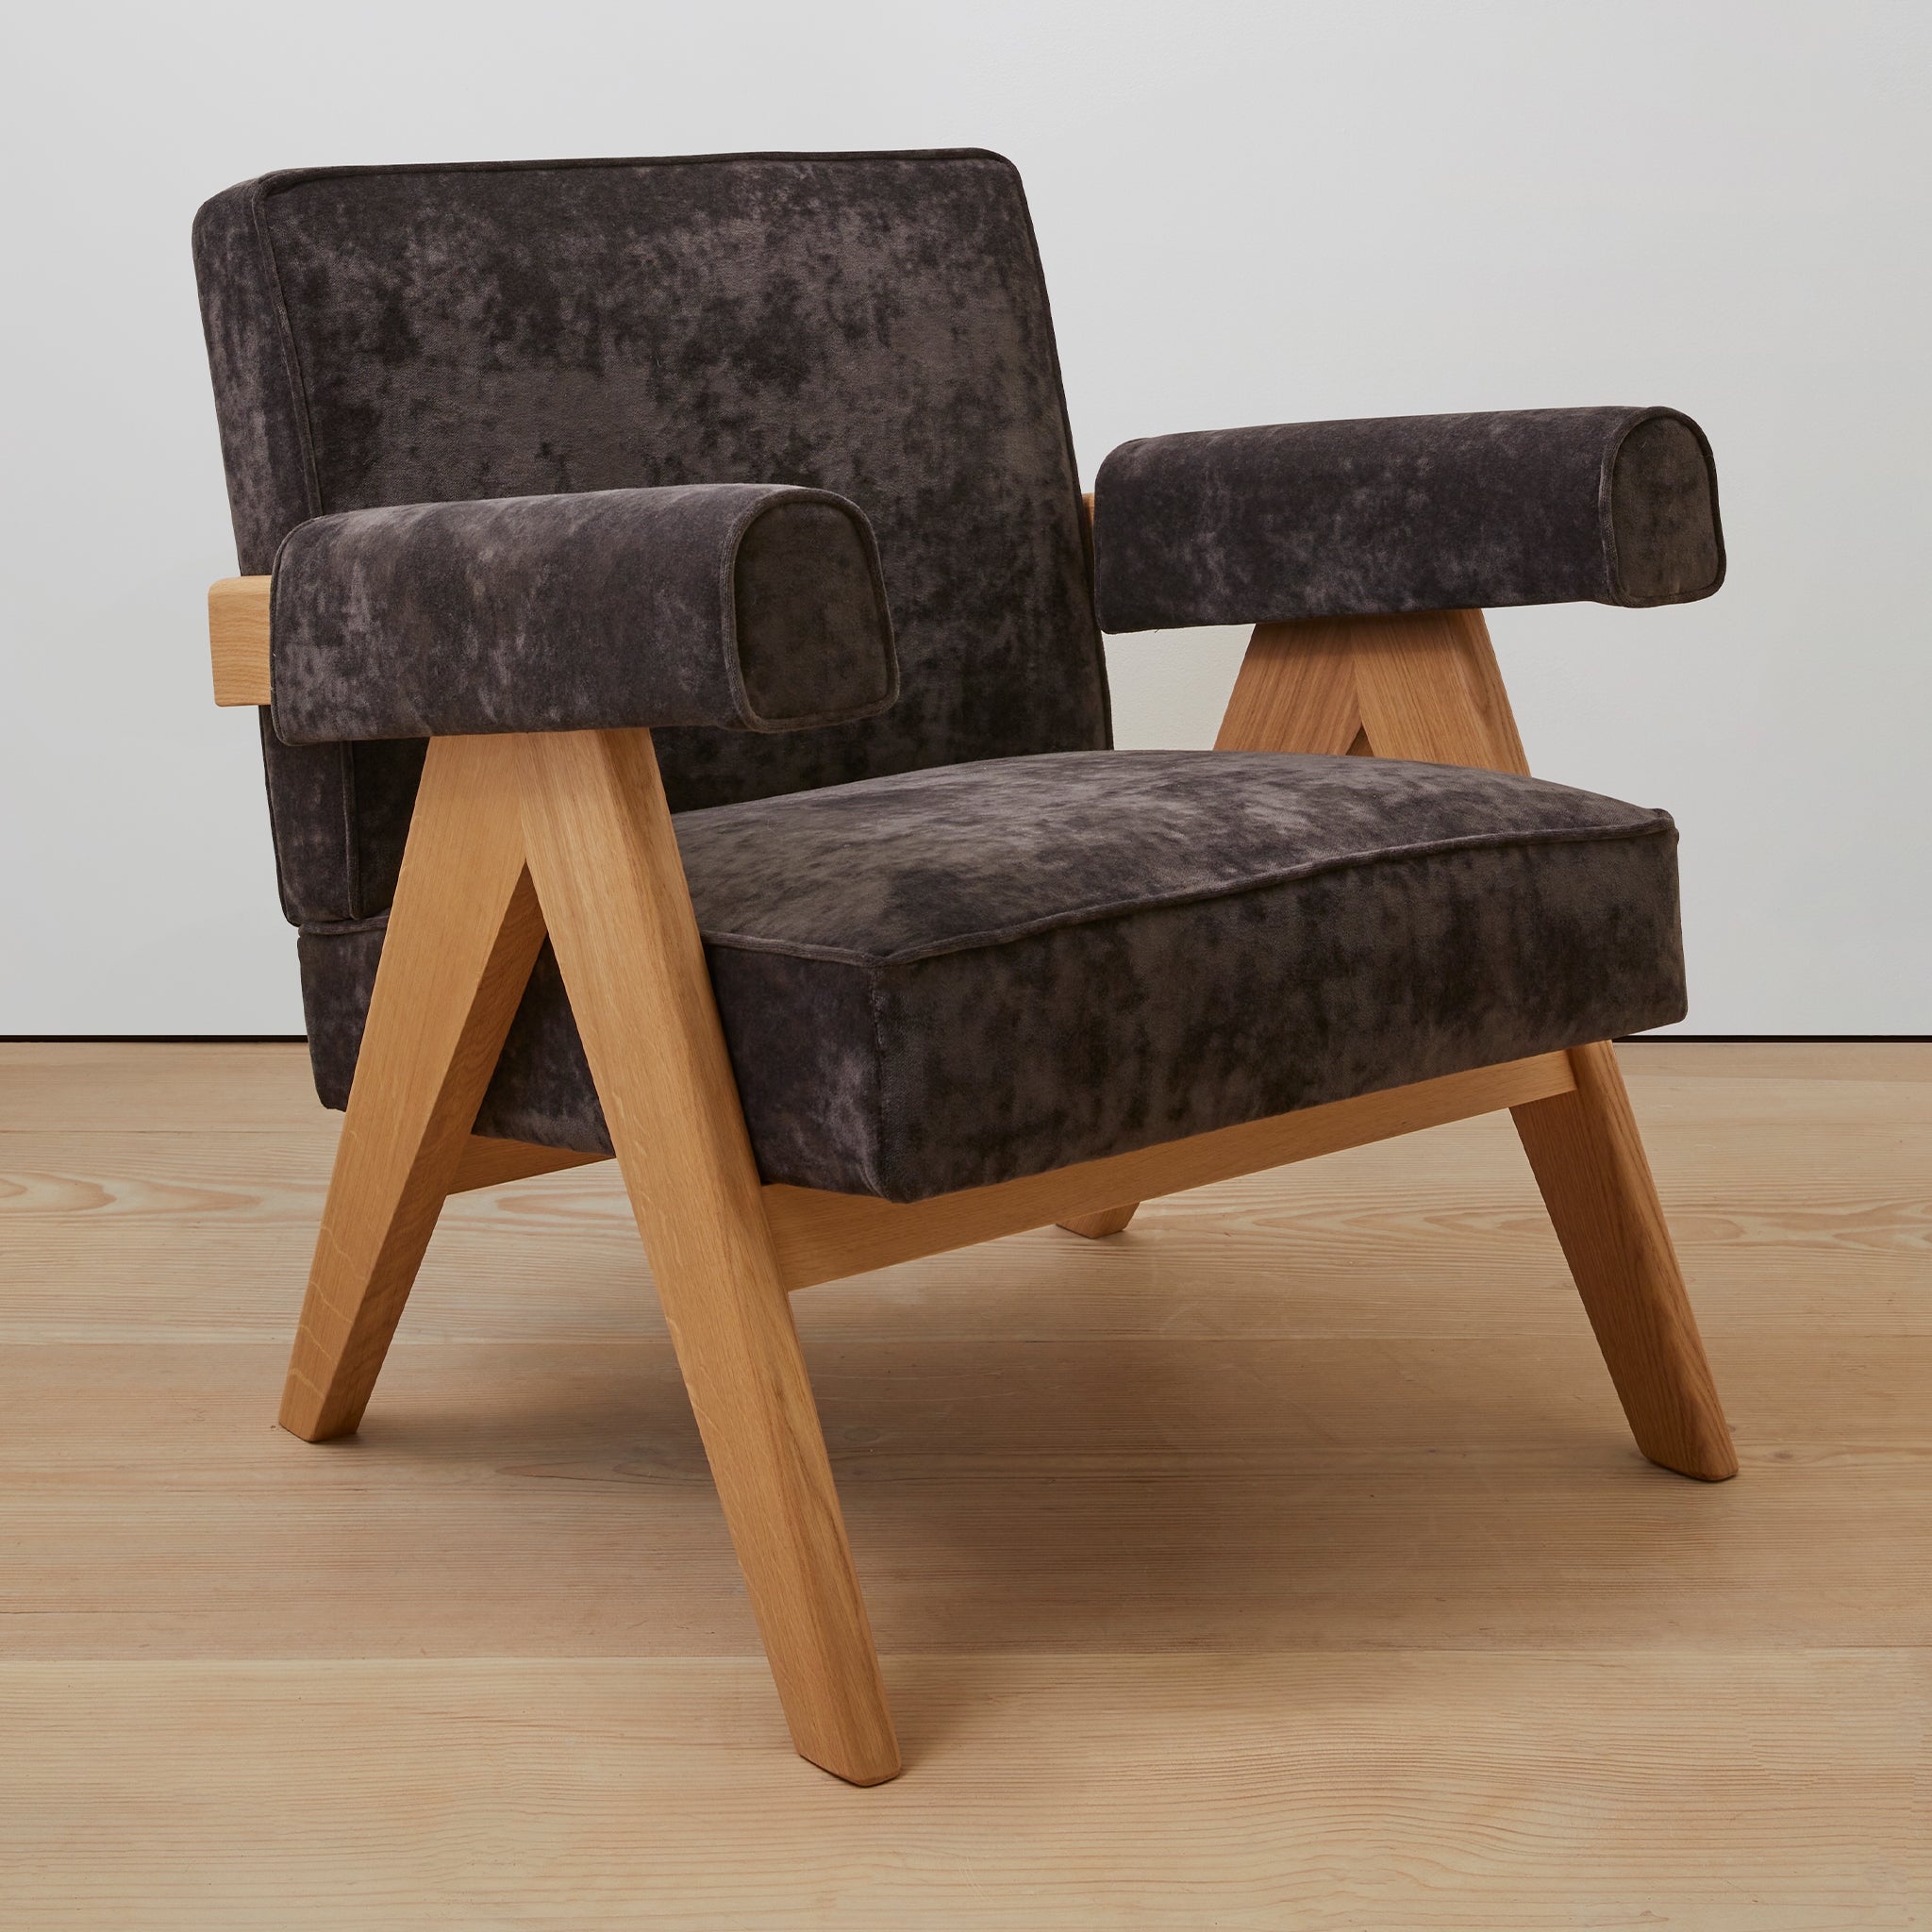 Main view of an authentic chandigarh lounge chair, pierre jeanneret era, natural oak frame, chocolate brown mohair upholstery, by Klarel #K35-36